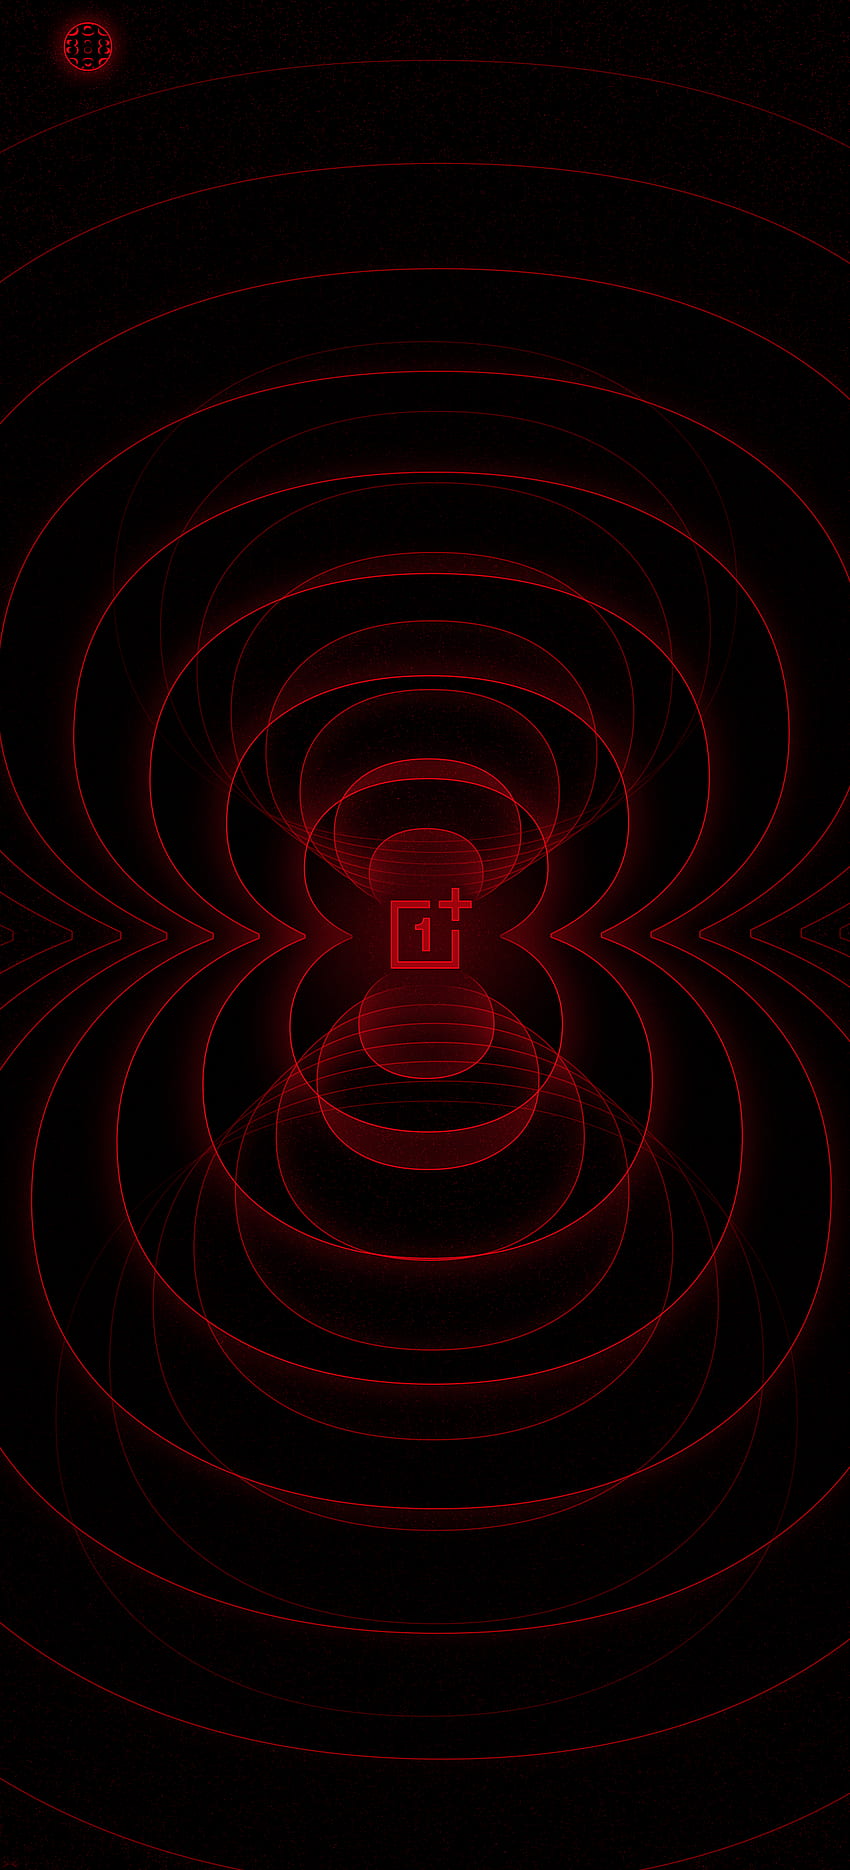 266706 timing is everything OnePlus 8 5G UW full hd wallpaper 1080x2400   Rare Gallery HD Wallpapers